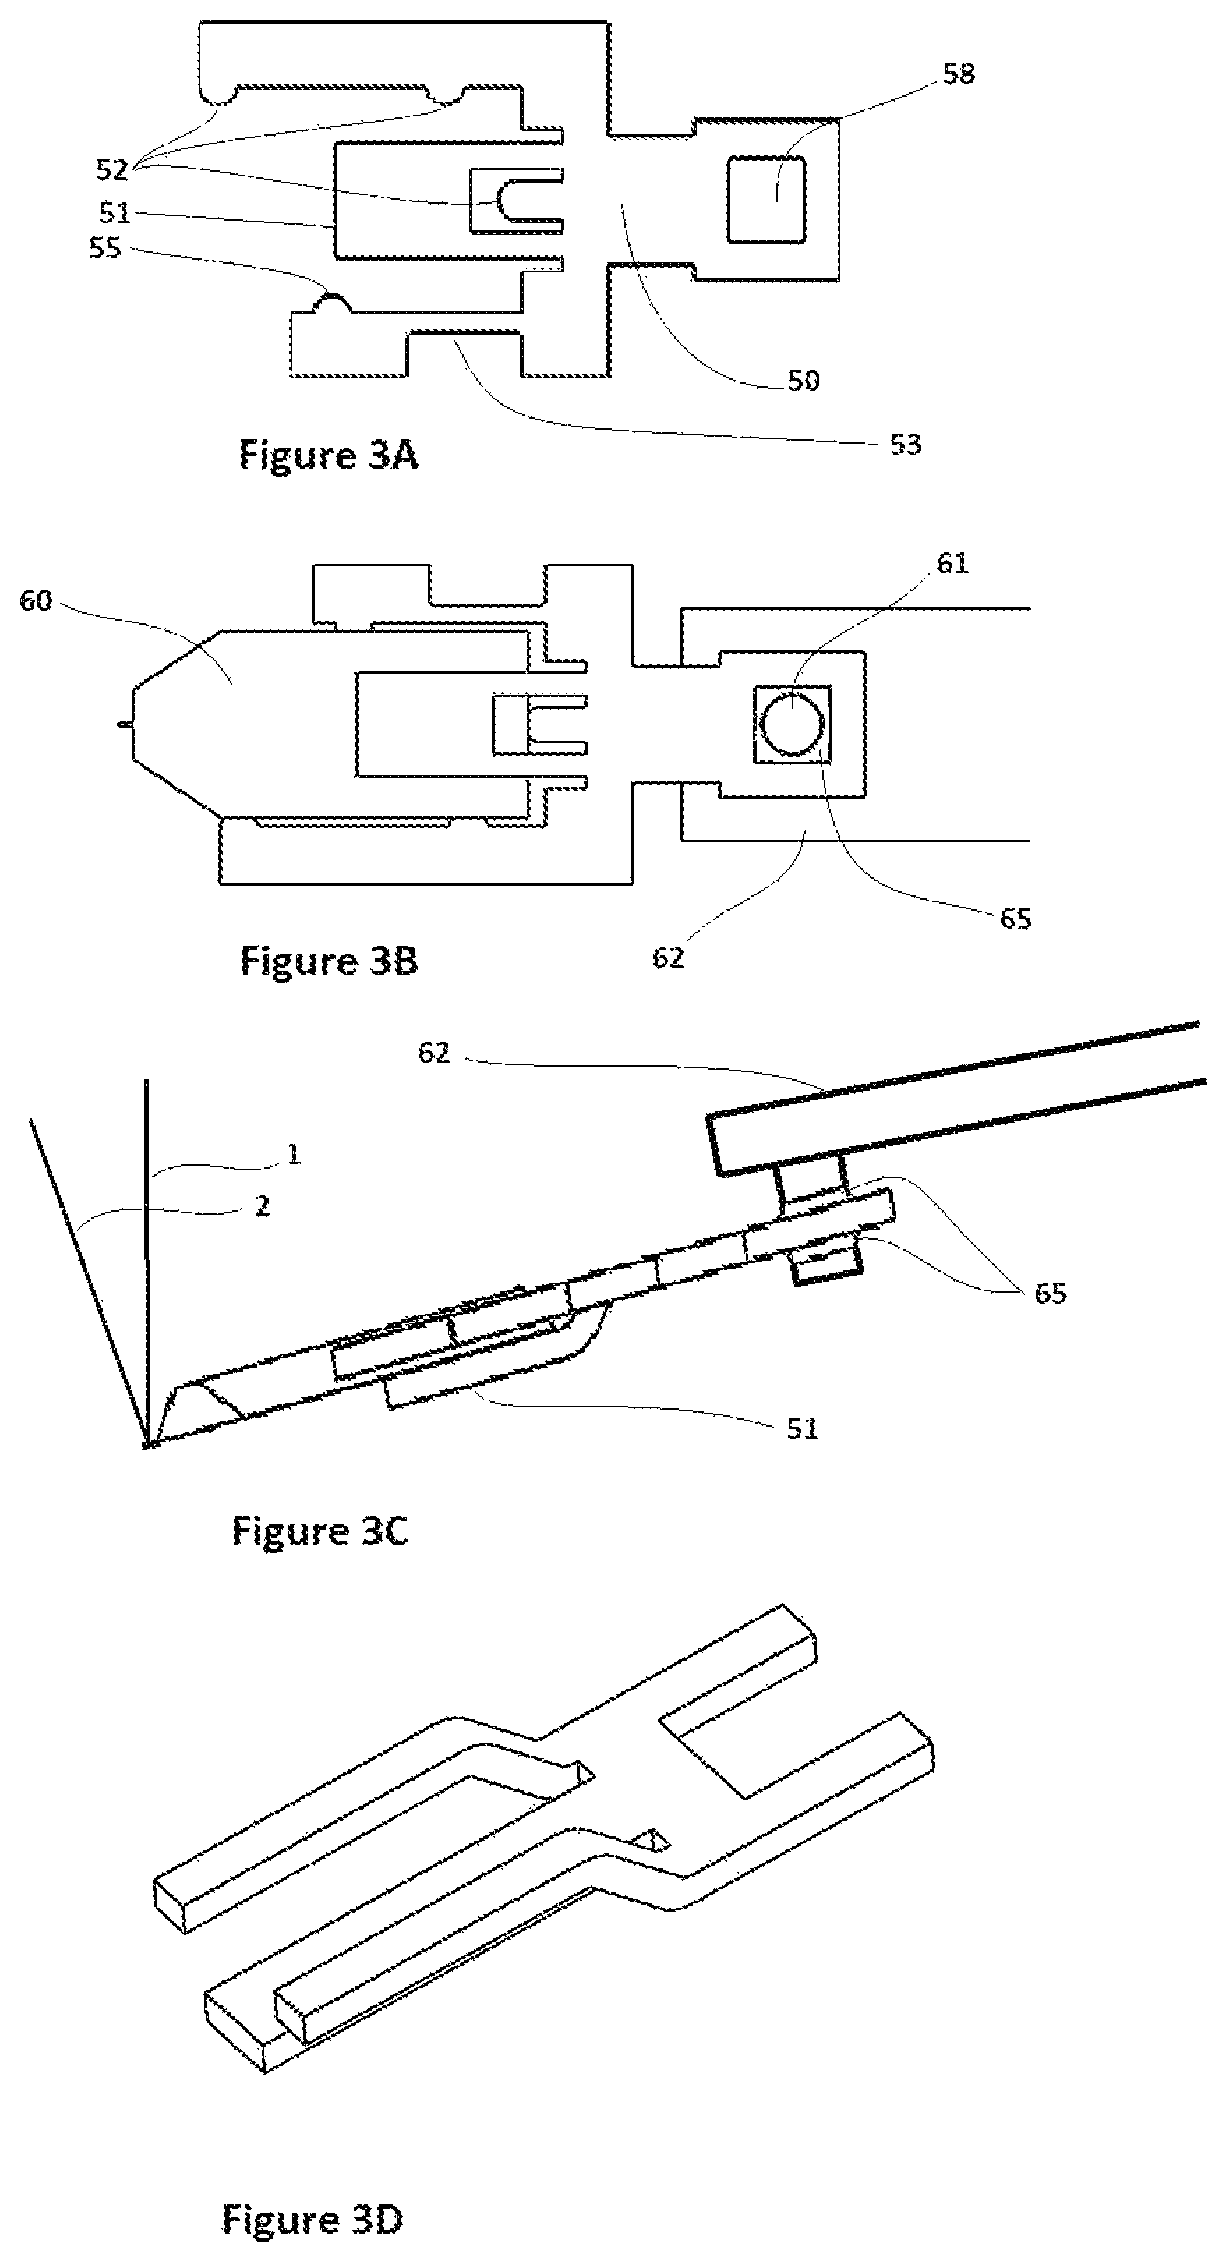 Scanned probe mounting design